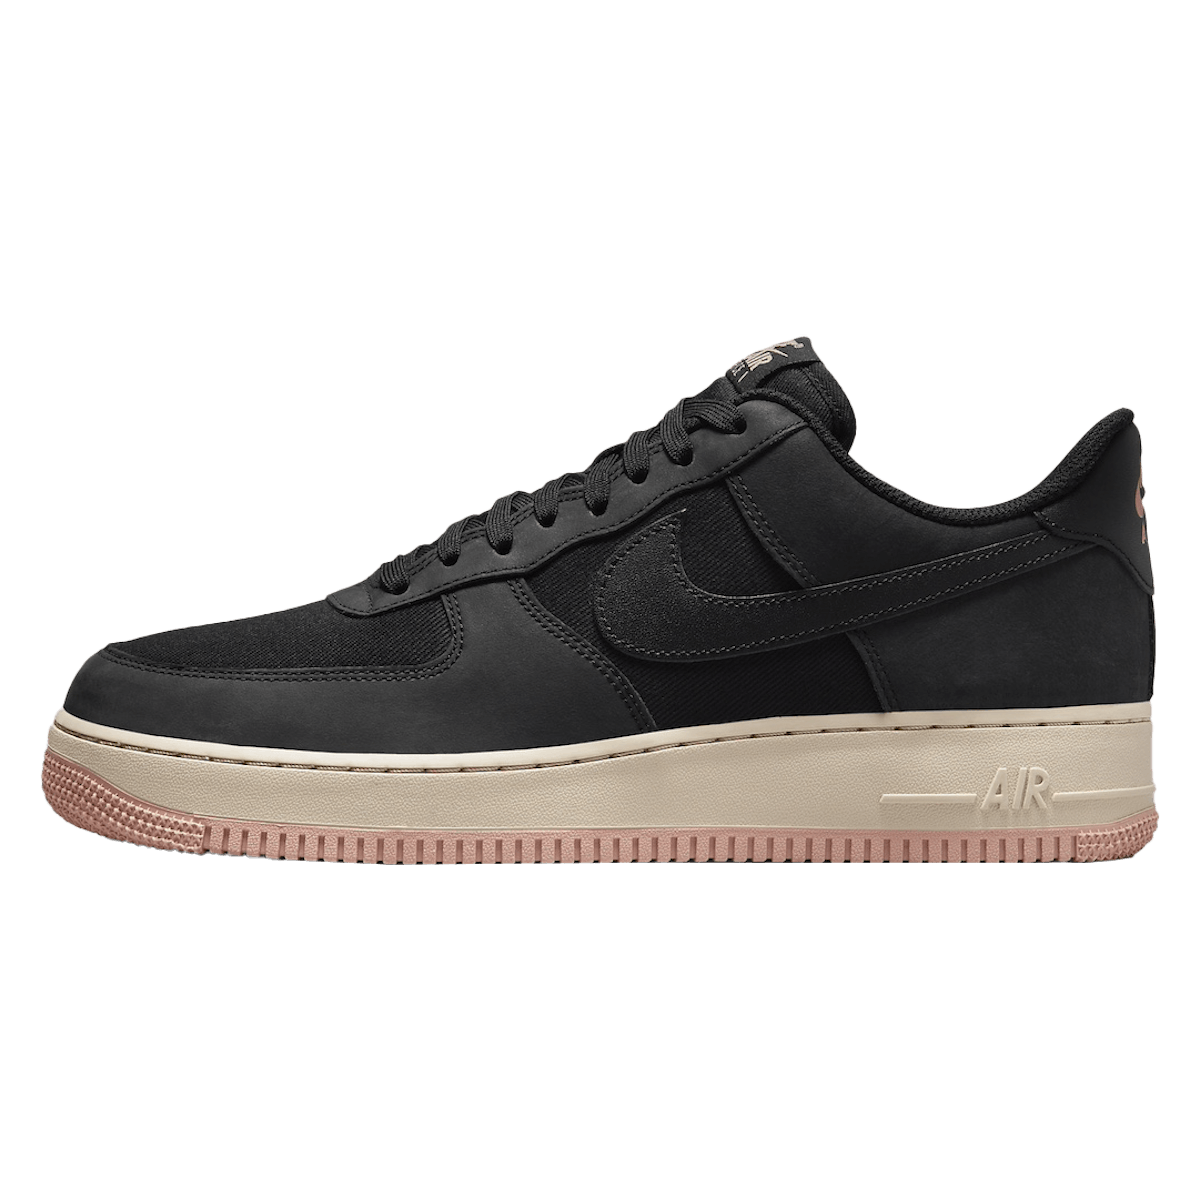 Nike Air Force 1 Low LX "Black Red Stardust"